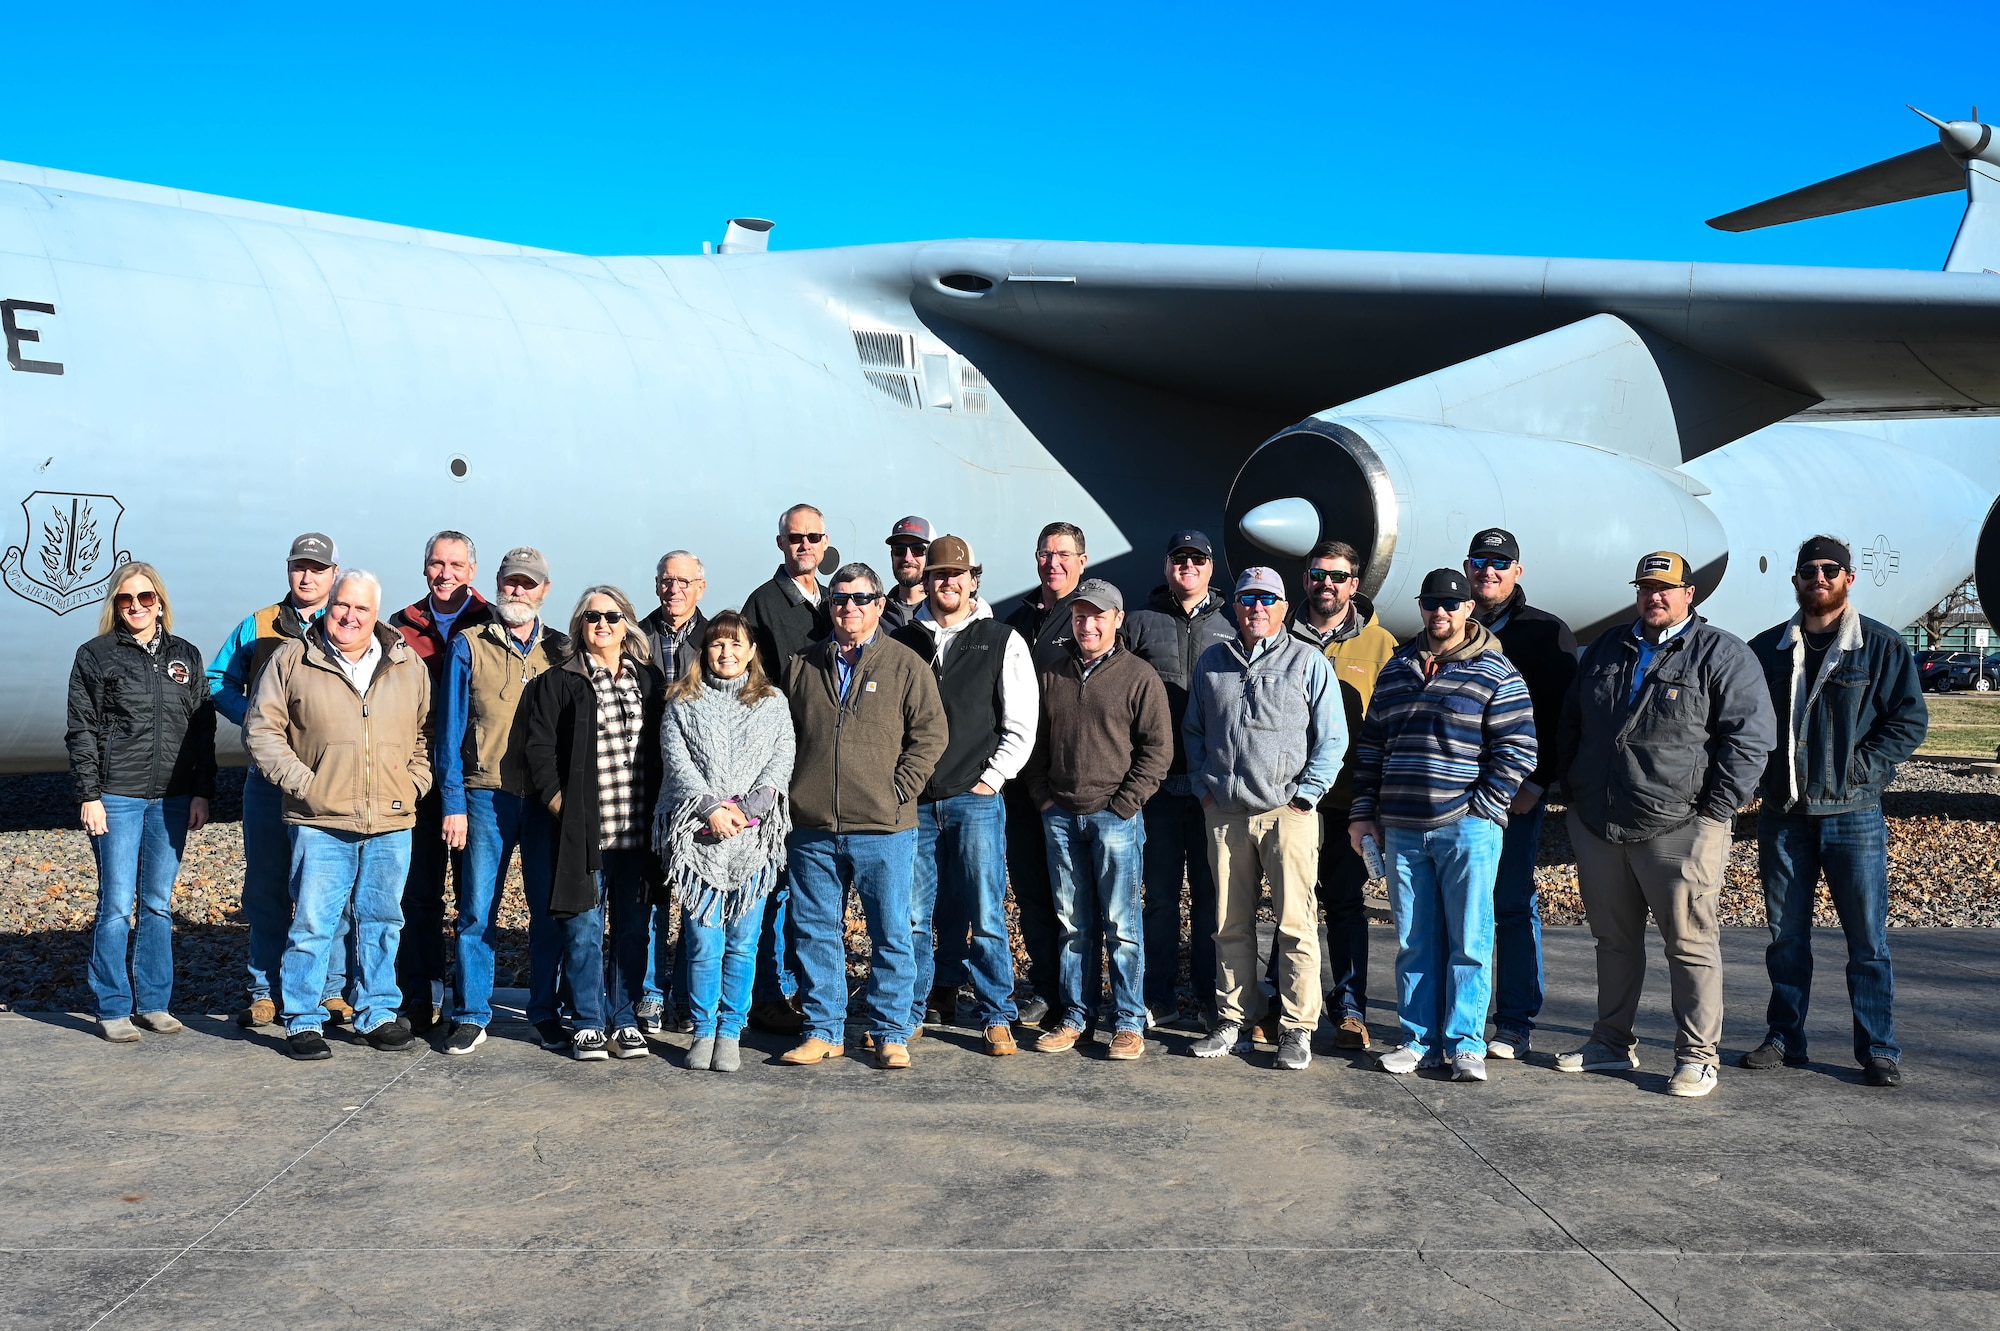 Members of the Altus agricultural and farming community pose for a group photo during the Airpower and Agricultural: Base Tour at Altus Air Force Base, Oklahoma, Jan. 12, 2024. The tour gave local members of the agriculture community the opportunity to witness the mission of the 97th Air Mobility Wing. (U.S. Air Force photo by Airman First Class Heidi Bucins)